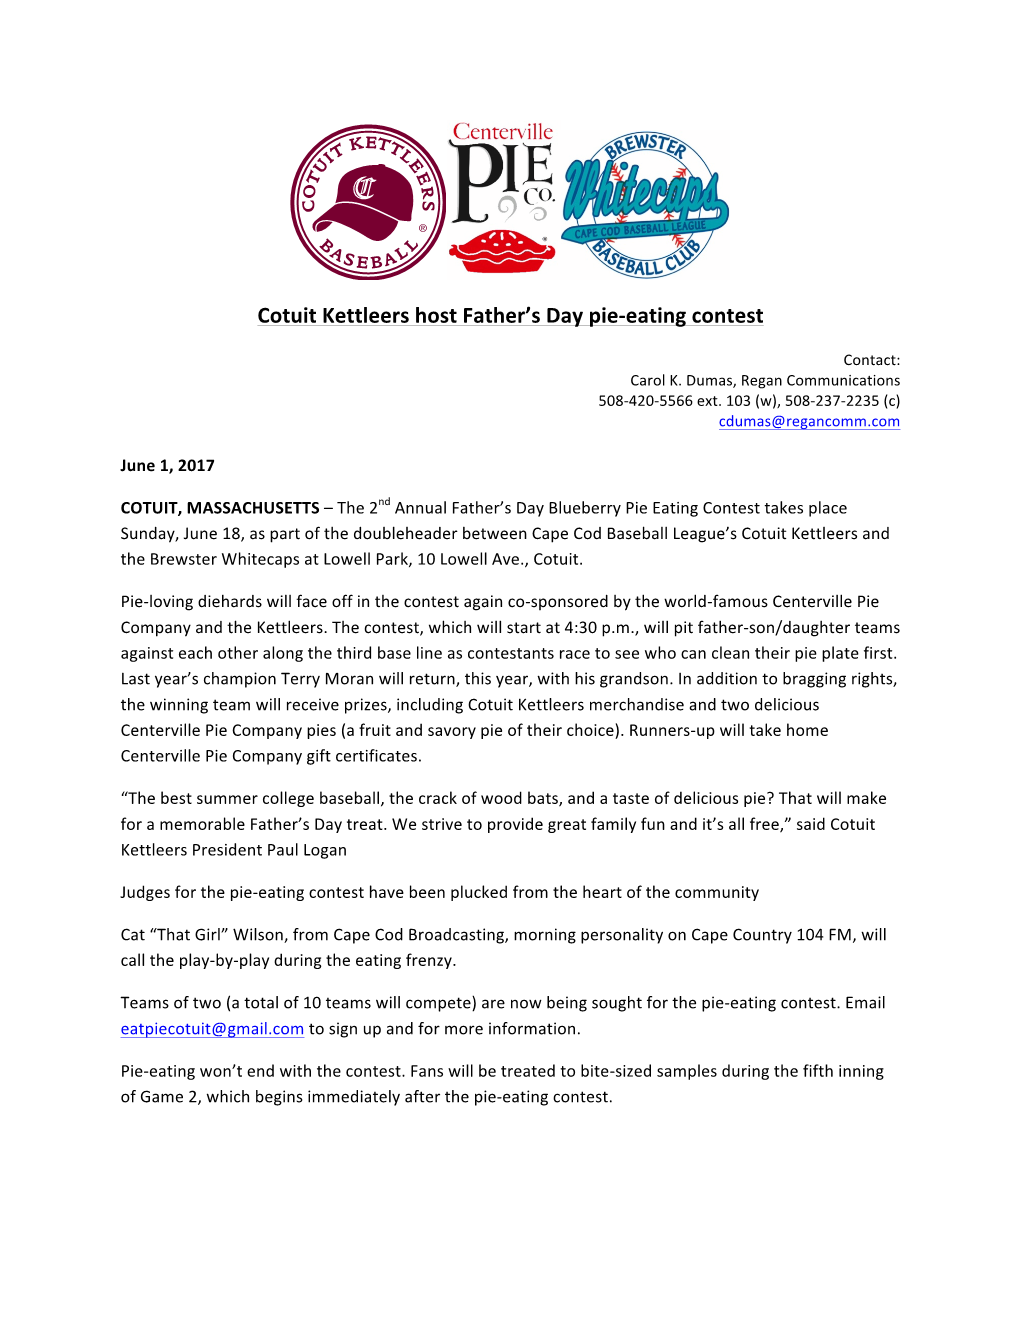 Cotuit Kettleers Host Father's Day Pie-Eating Contest